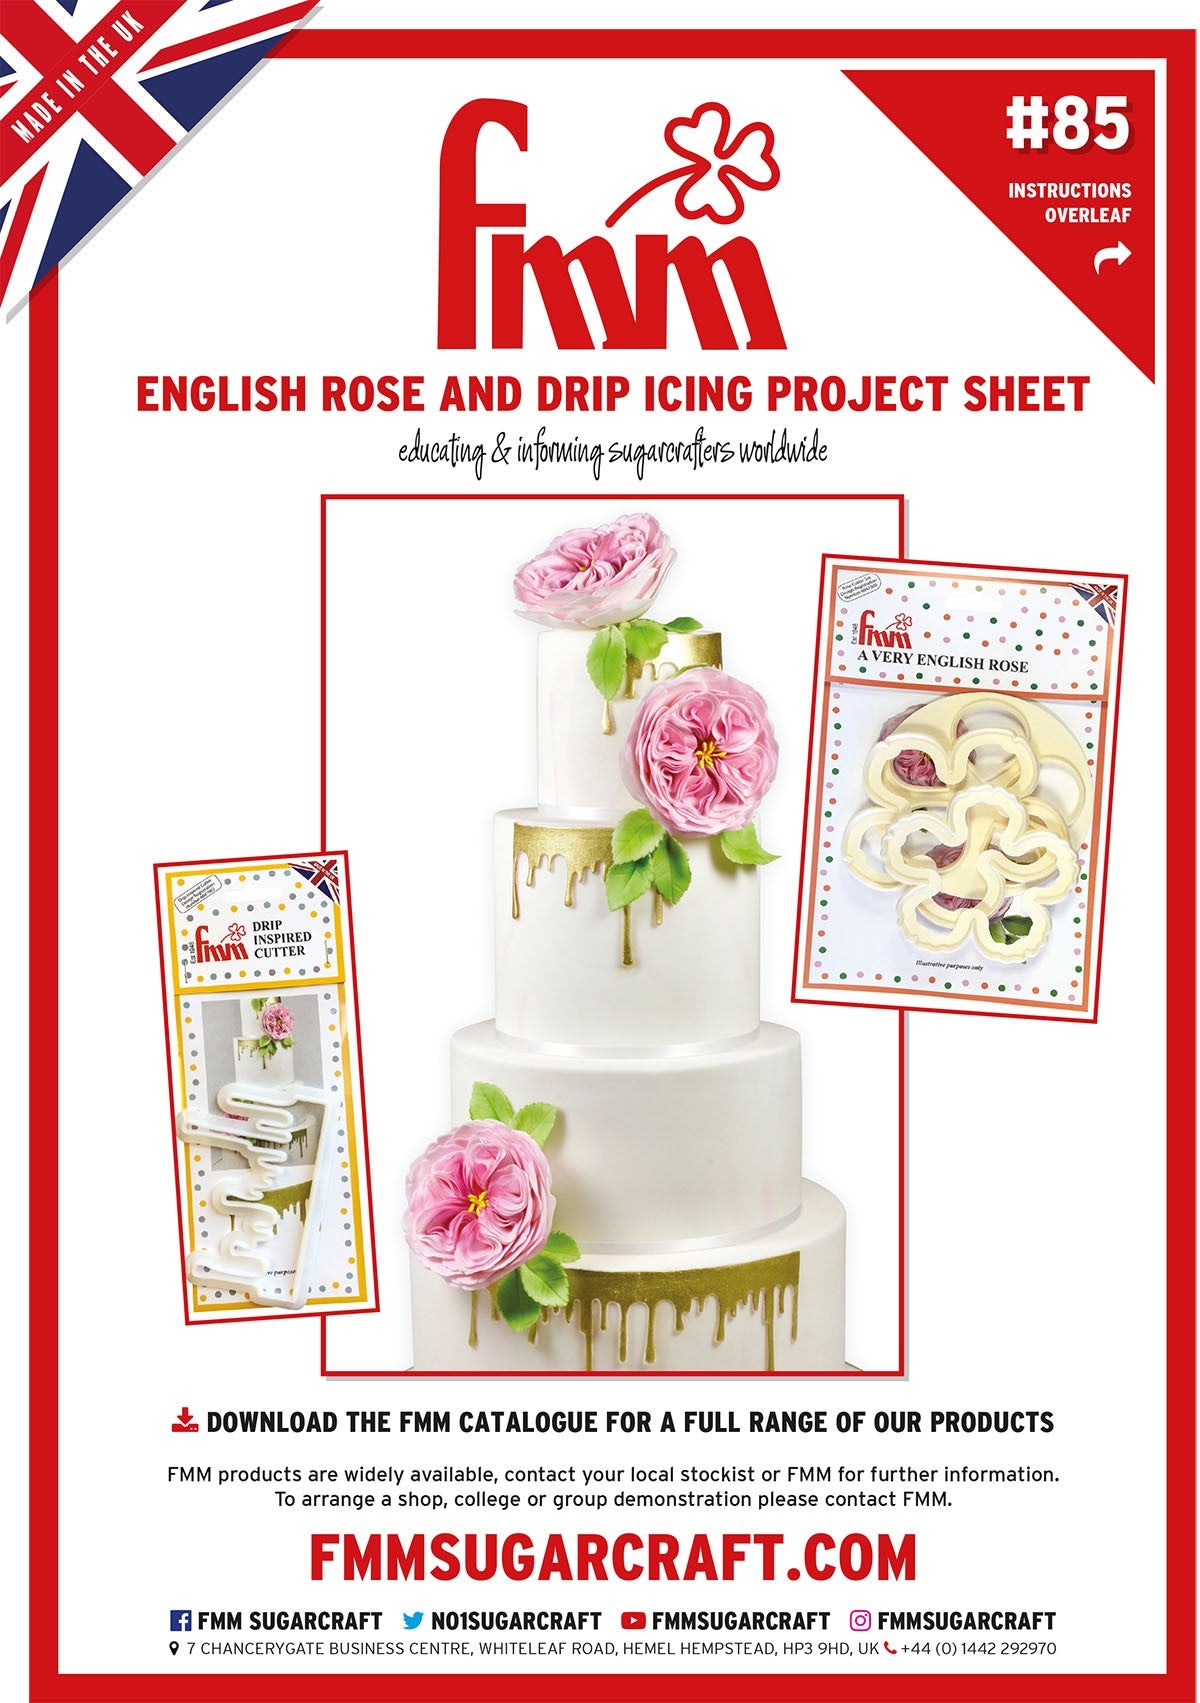 A Very English Rose and Drip Cutters Project Sheet